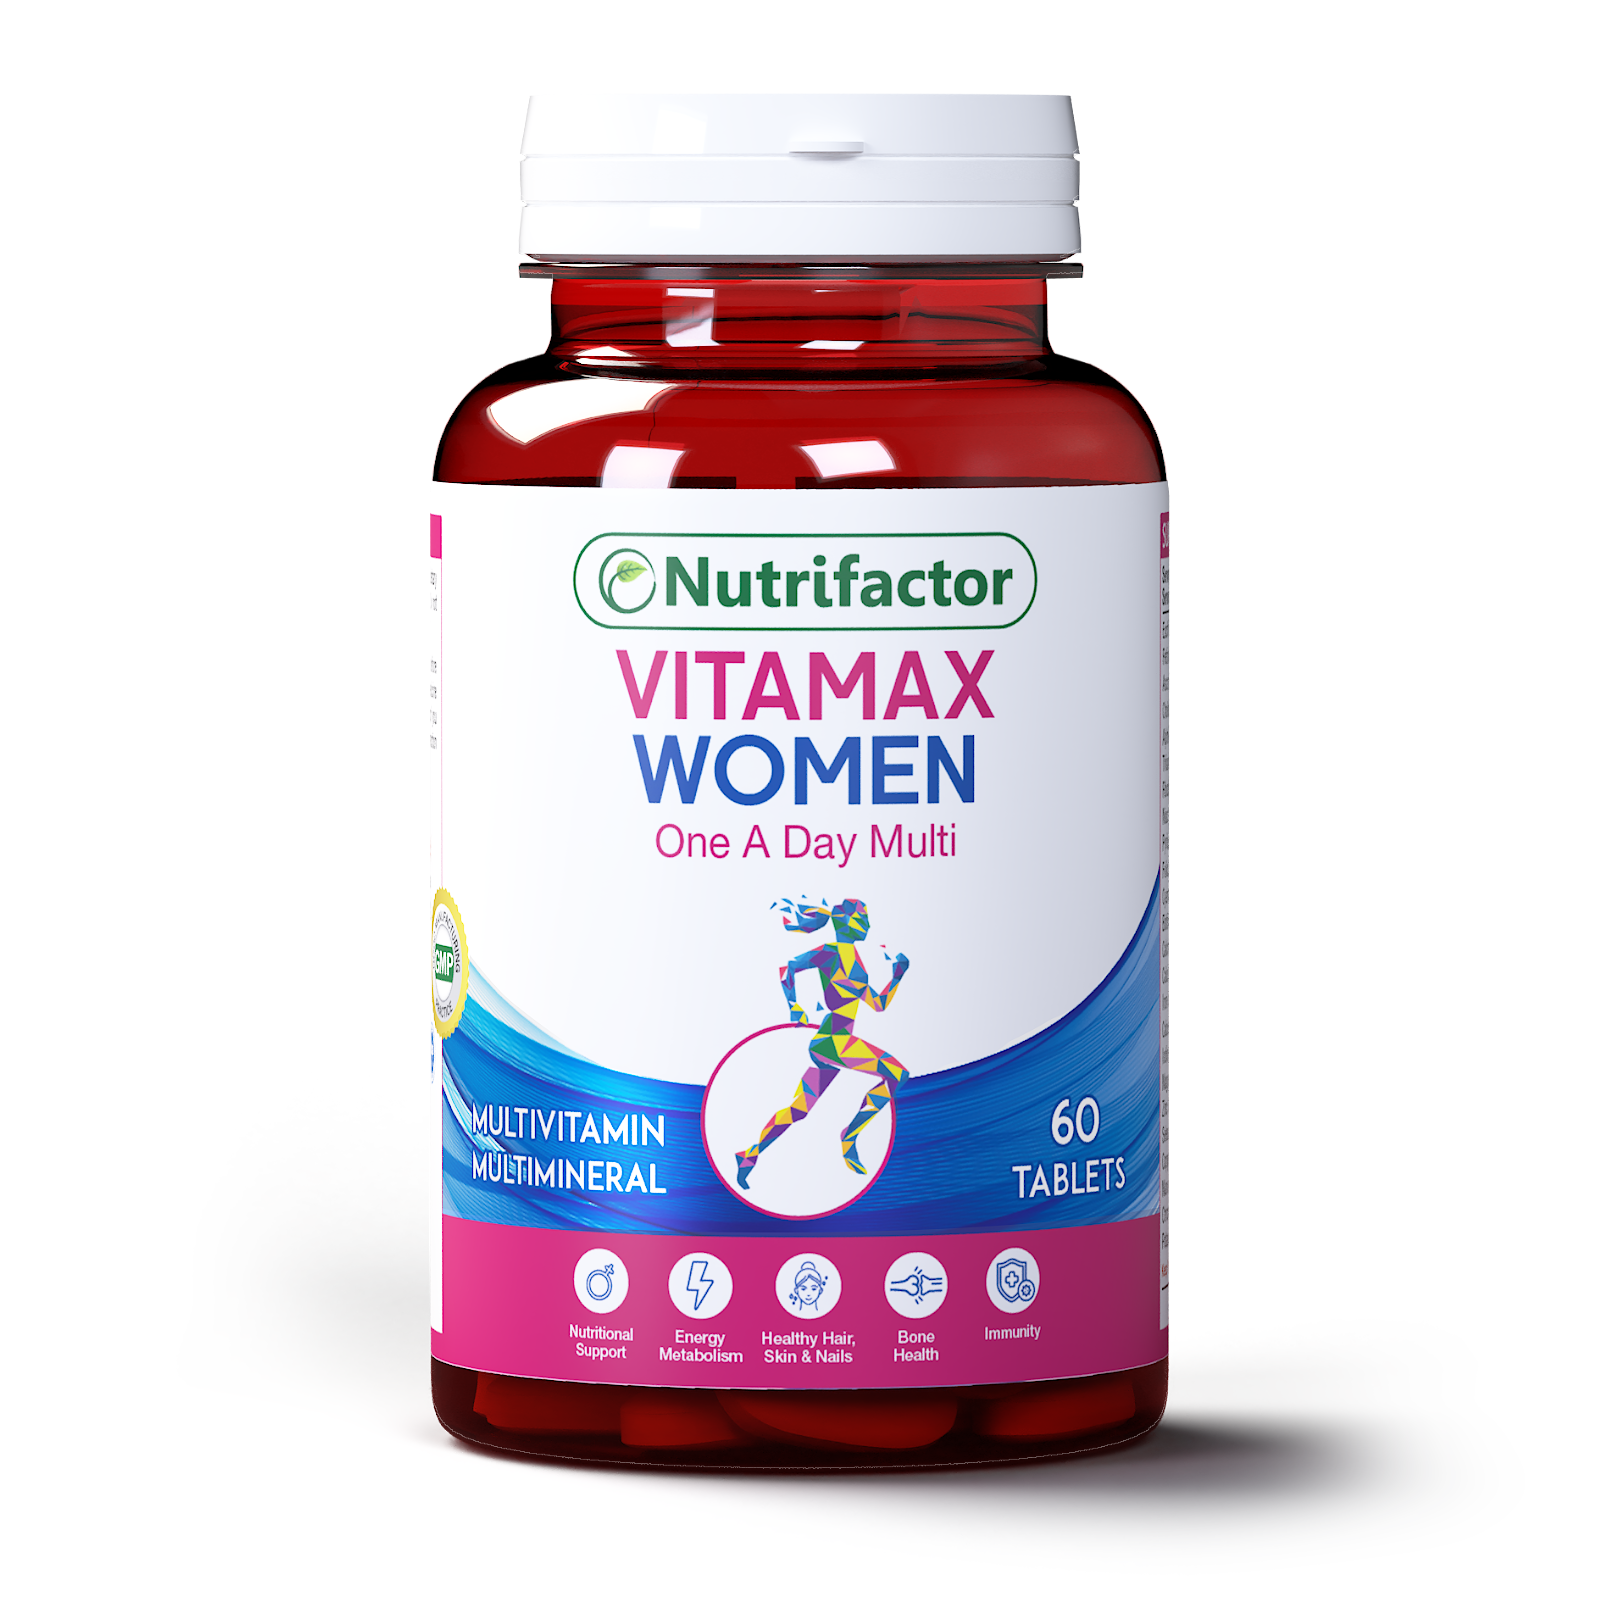 all　Women　Supports　Women's　Nutrifactor　Needs　Vitamax　Nutritional